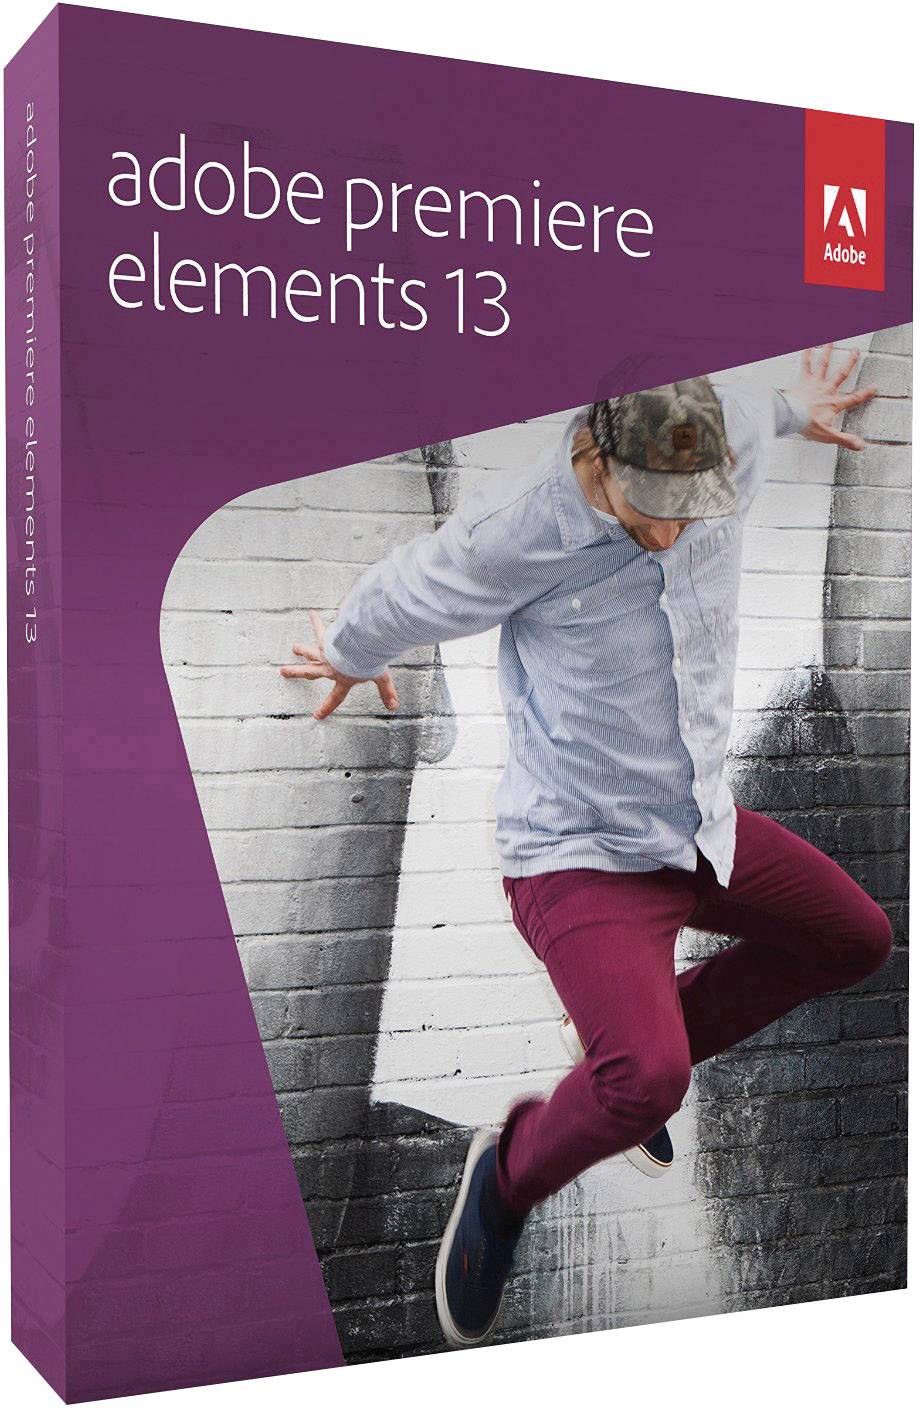 what is adobe premiere elements 13 used for